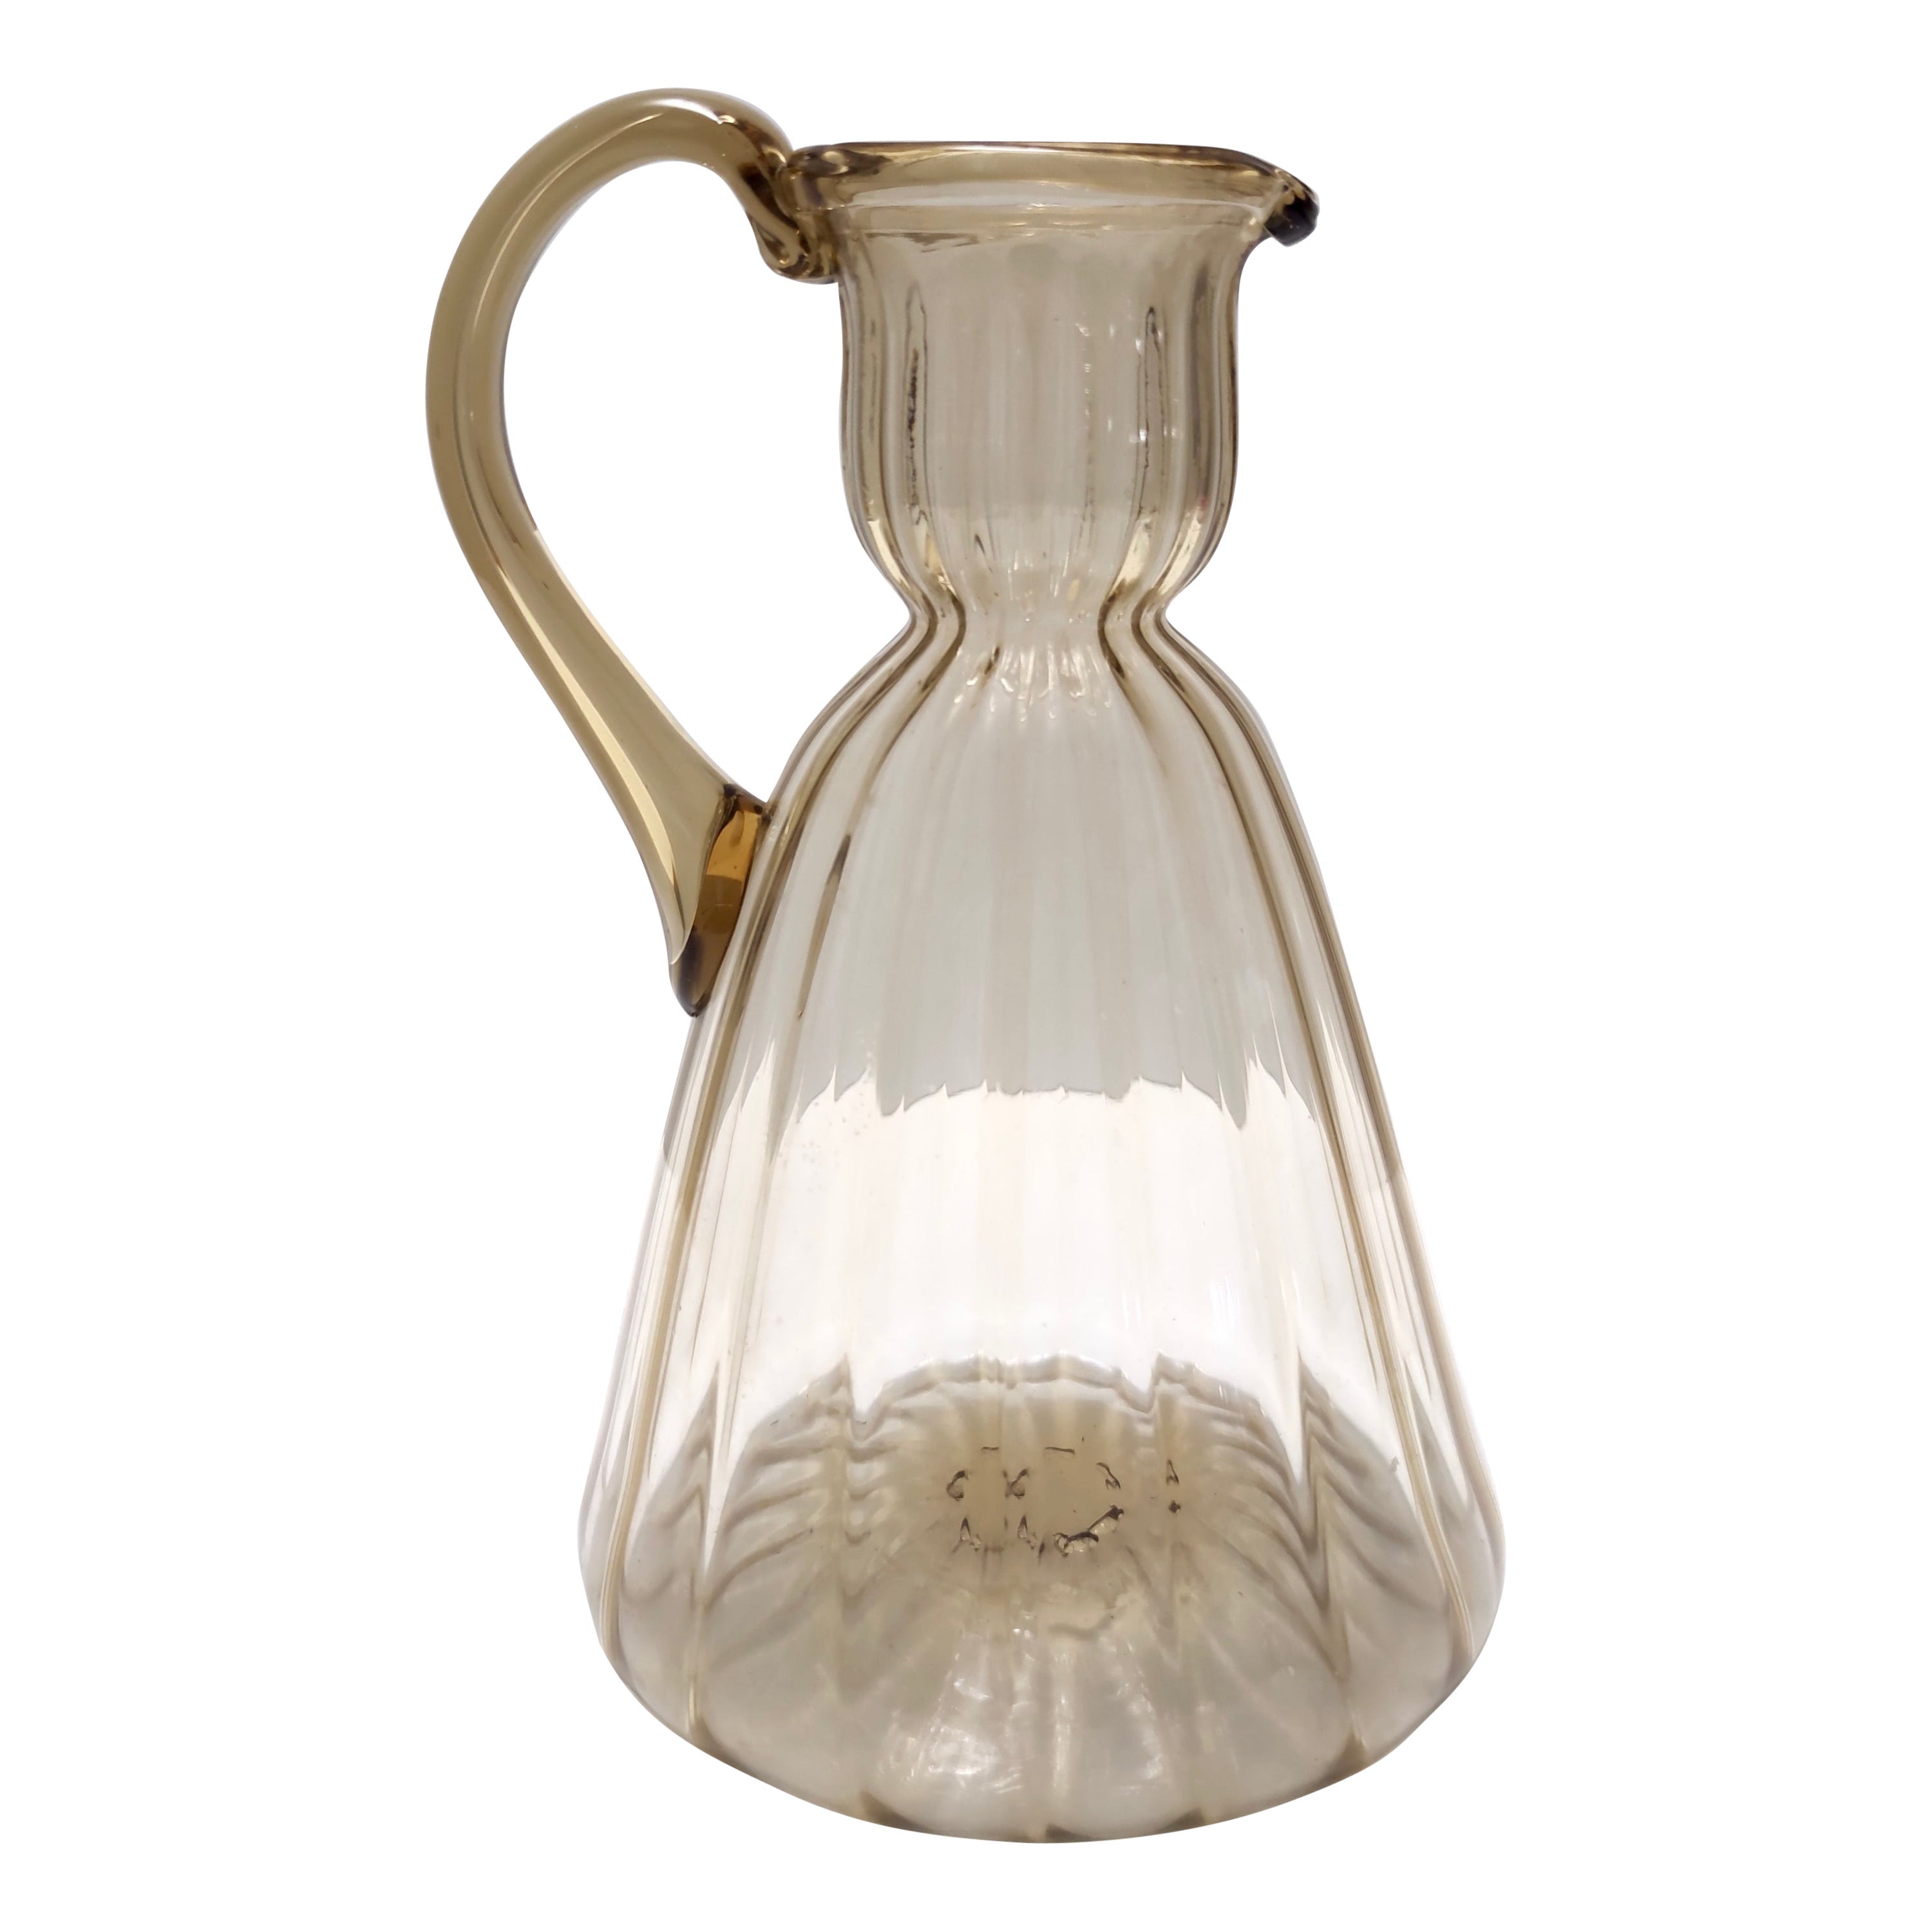 Vintage Straw-Colored Glass Pitcher Vase Ascribable to Vittorio Zecchin, Italy